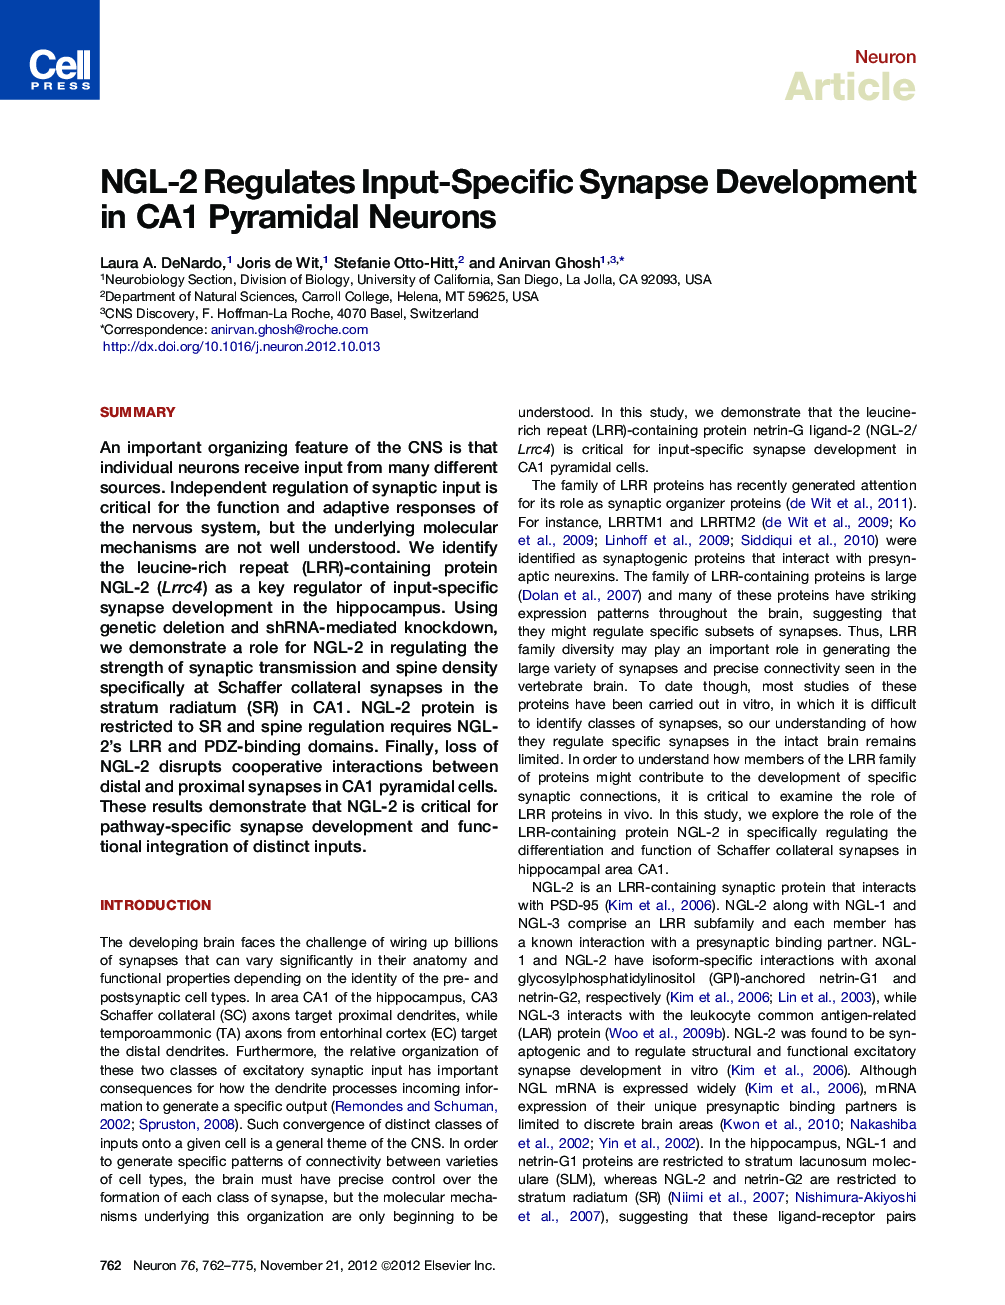 NGL-2 Regulates Input-Specific Synapse Development in CA1 Pyramidal Neurons